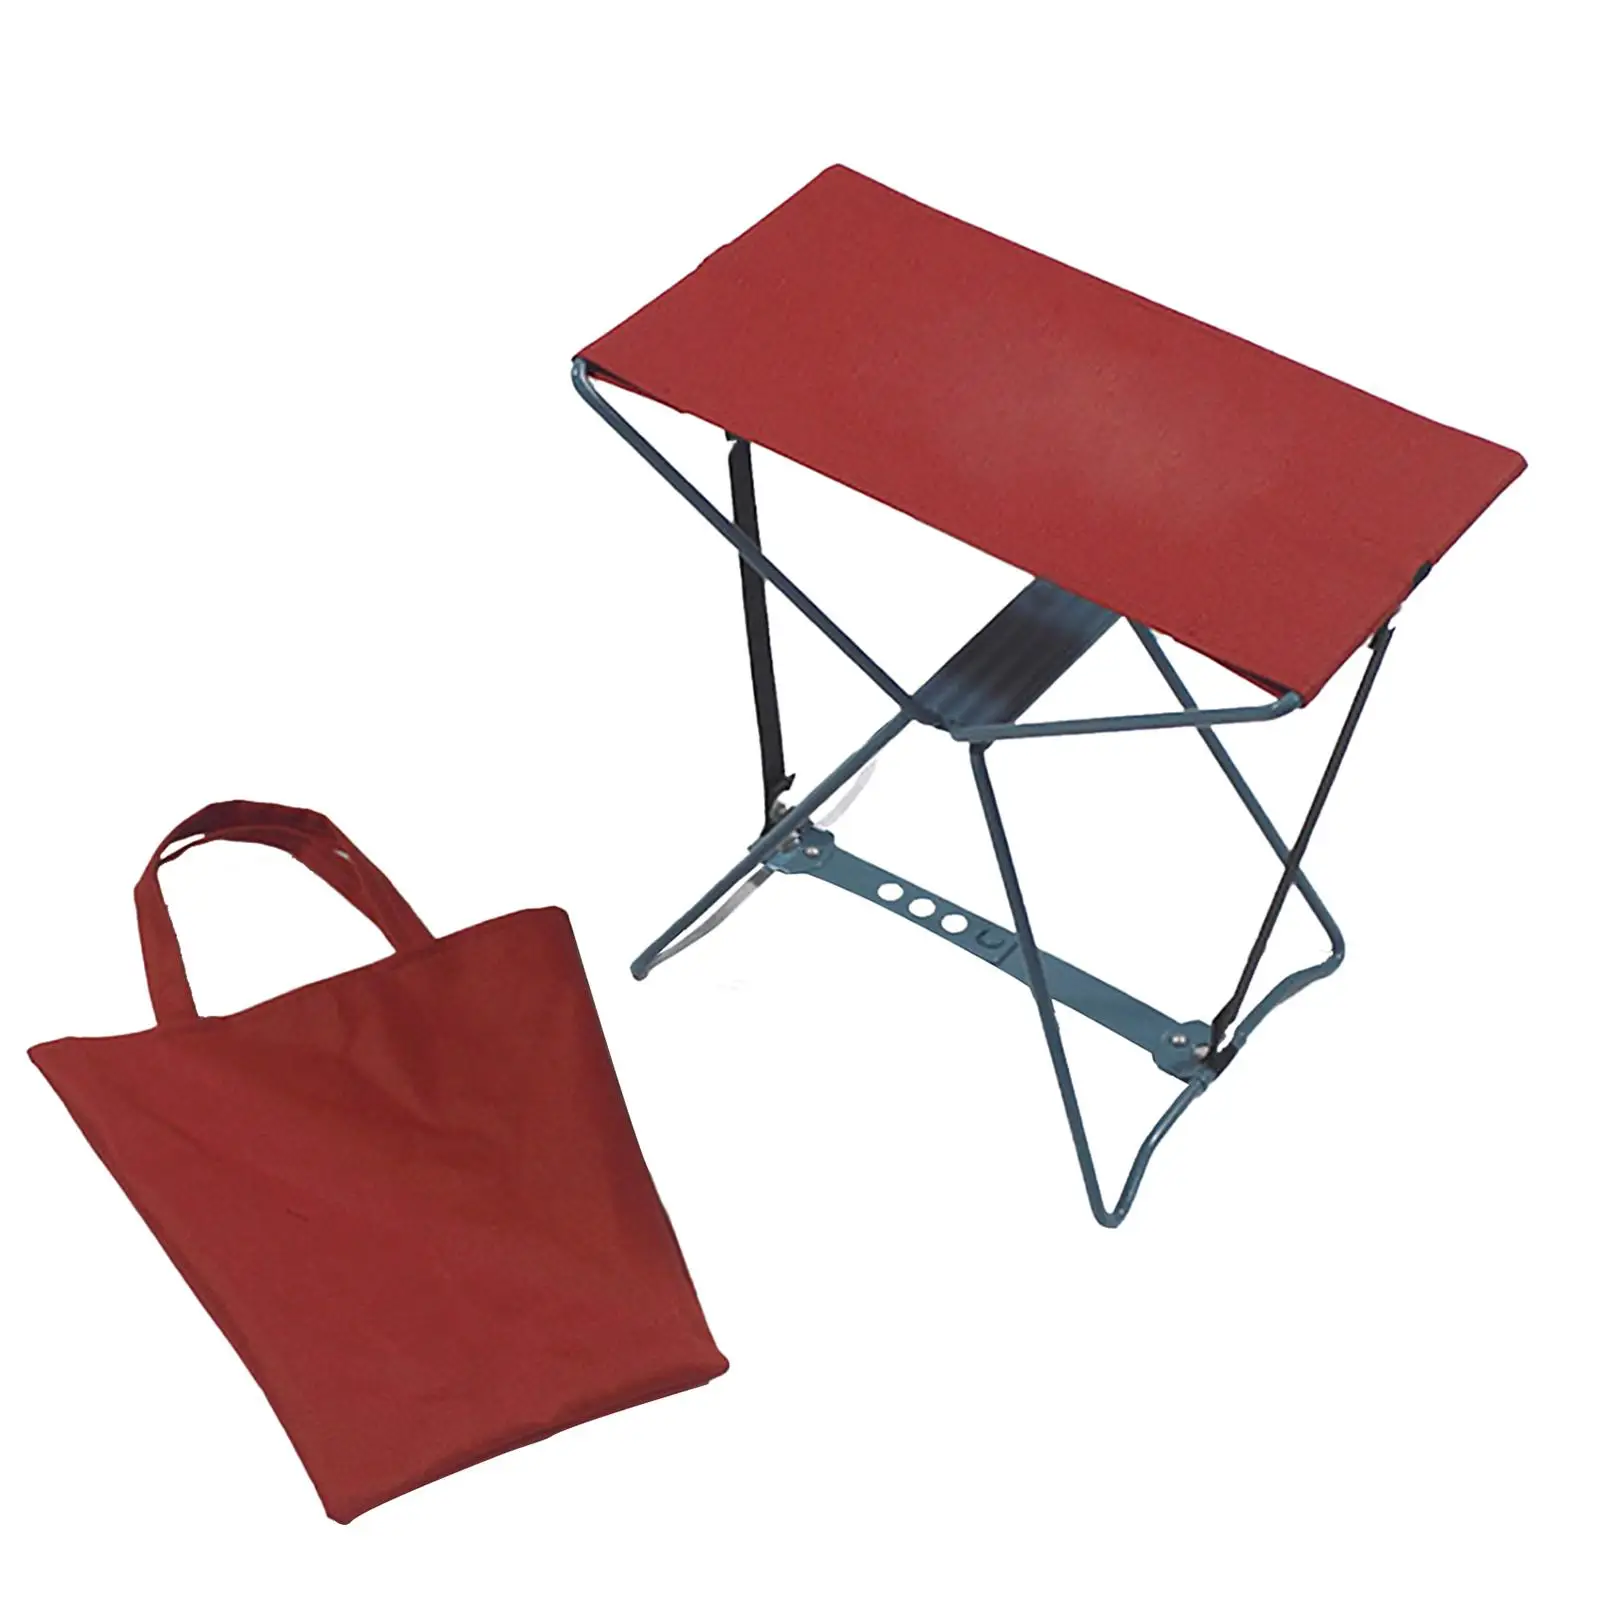 Folding Fishing Stool with Storage Bag Multifunction Collapsible Camping Stool for Barbecue Fishing Backpacking Bedroom Yravel